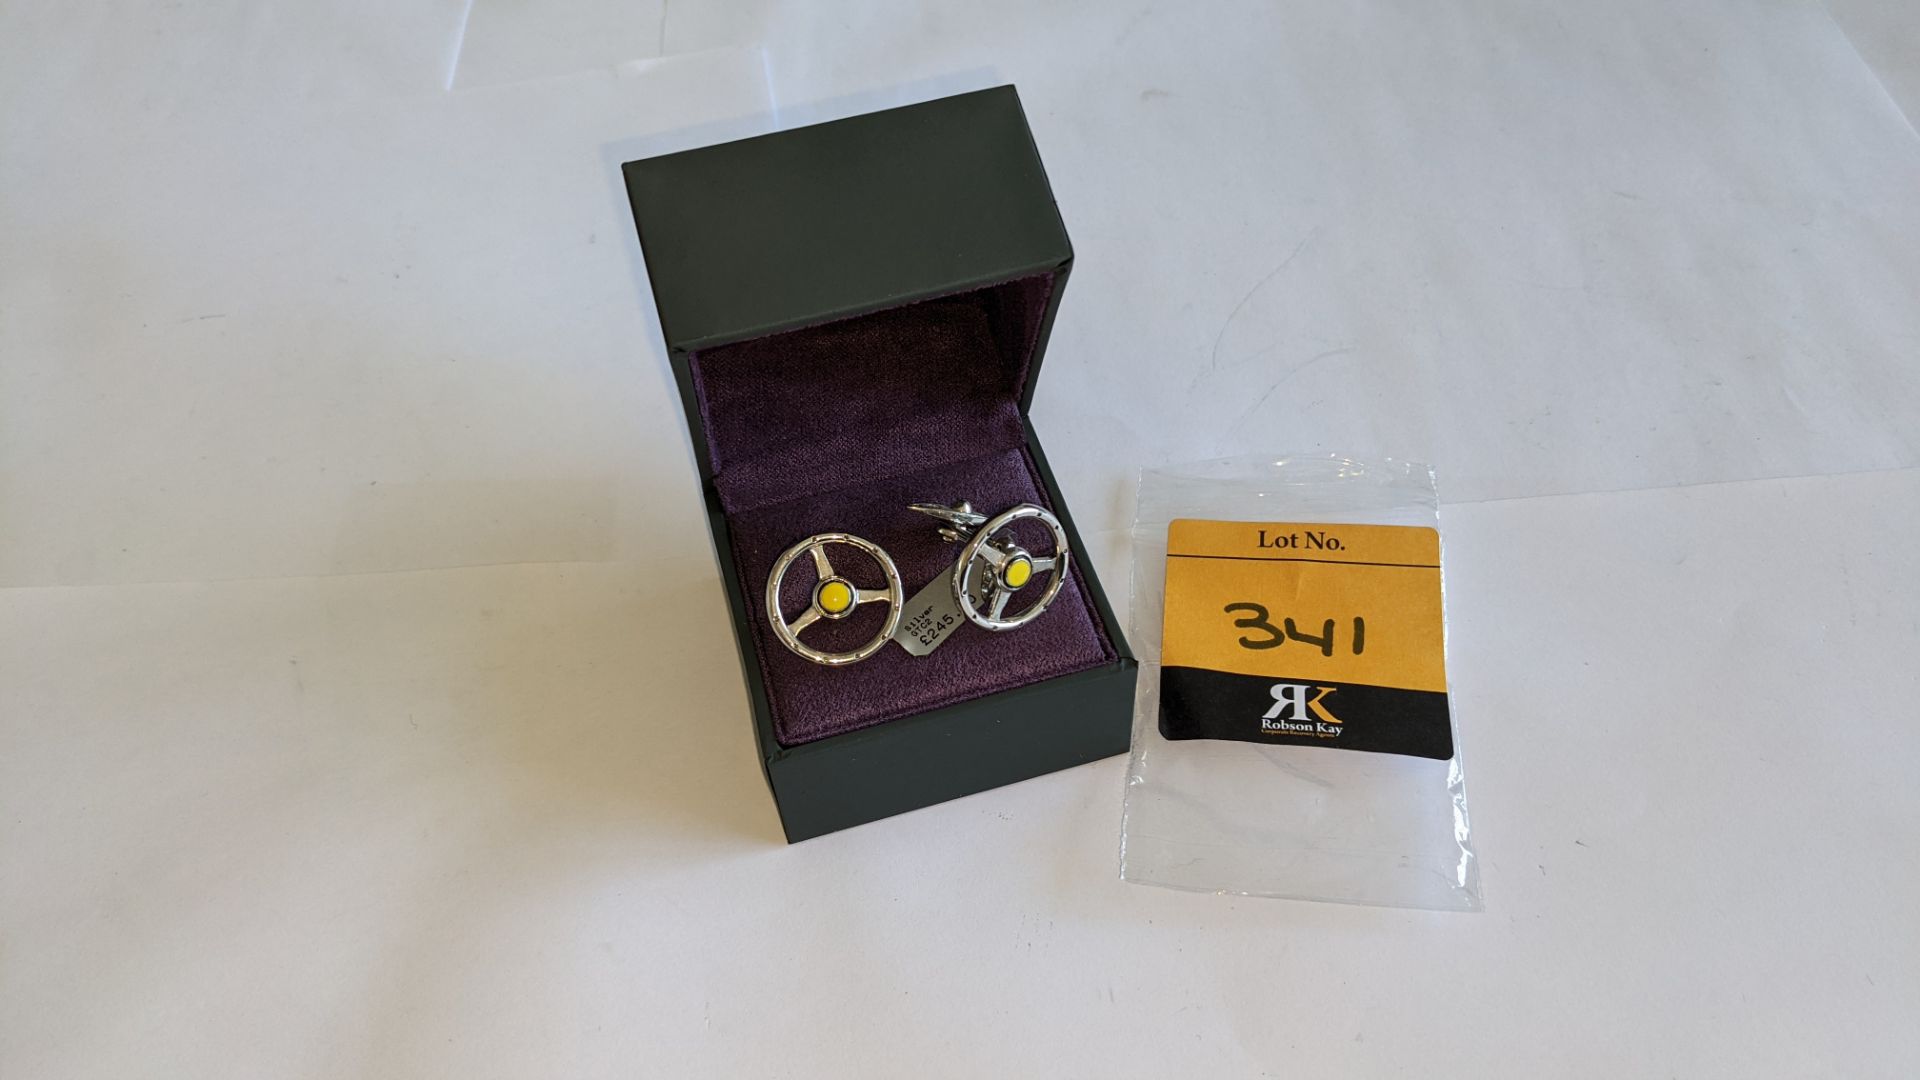 GTO London silver Volante cufflinks. RRP £245. Product code GTC2. NB. An internet search suggests G